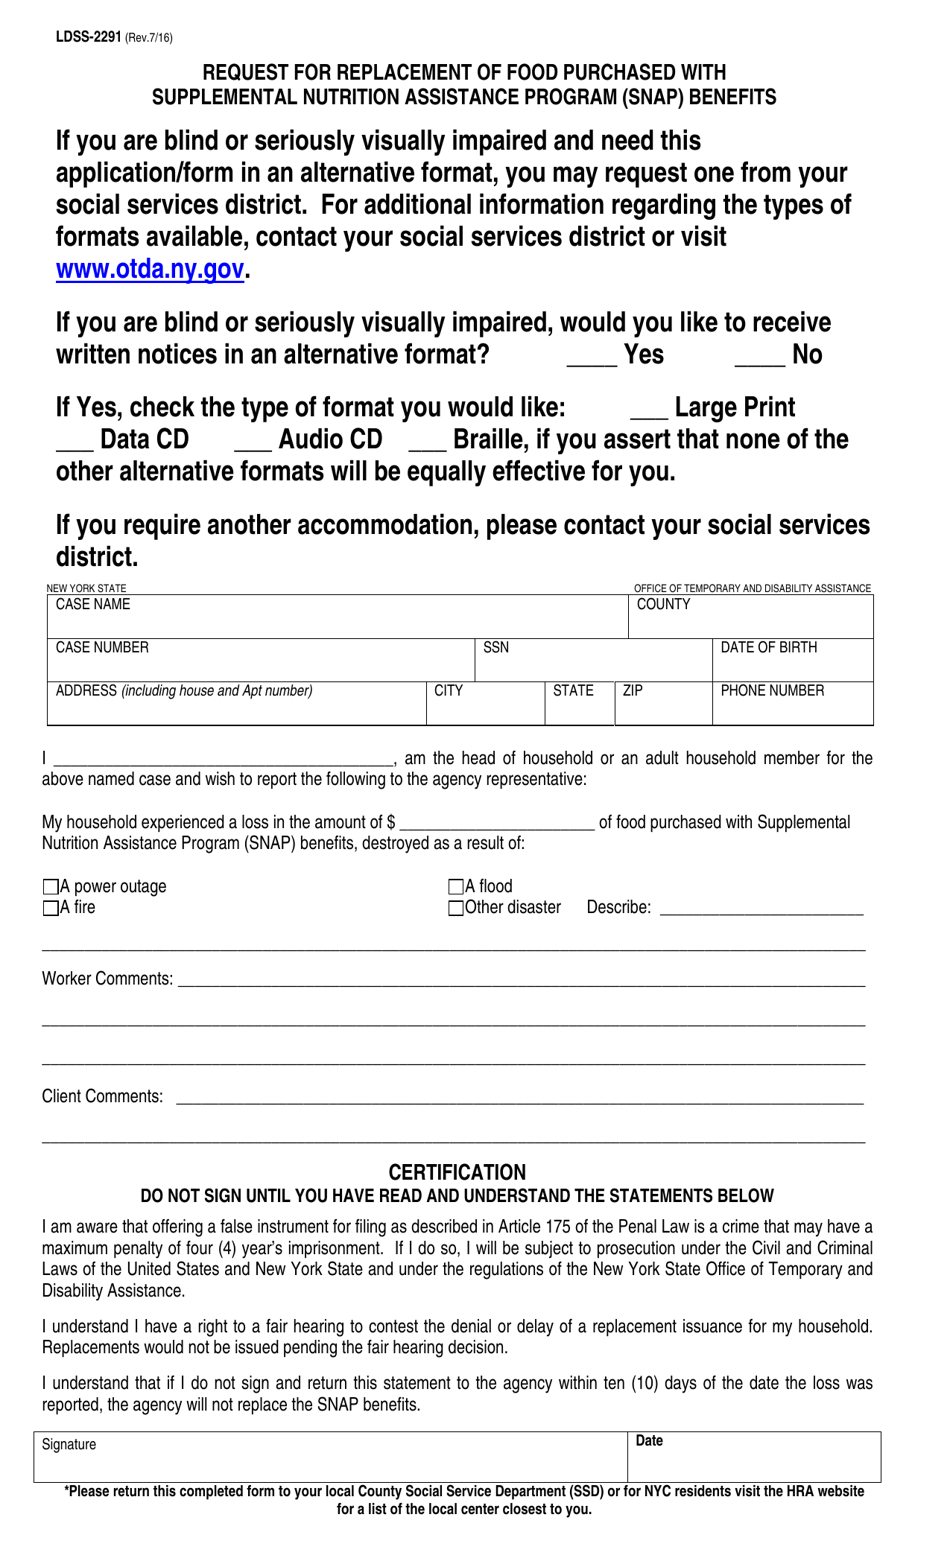 Form LDSS-2291 Request for Replacement of Food Purchased With Supplemental Nutrition Assistance Program (Snap) Benefits - New York (English / Spanish), Page 1